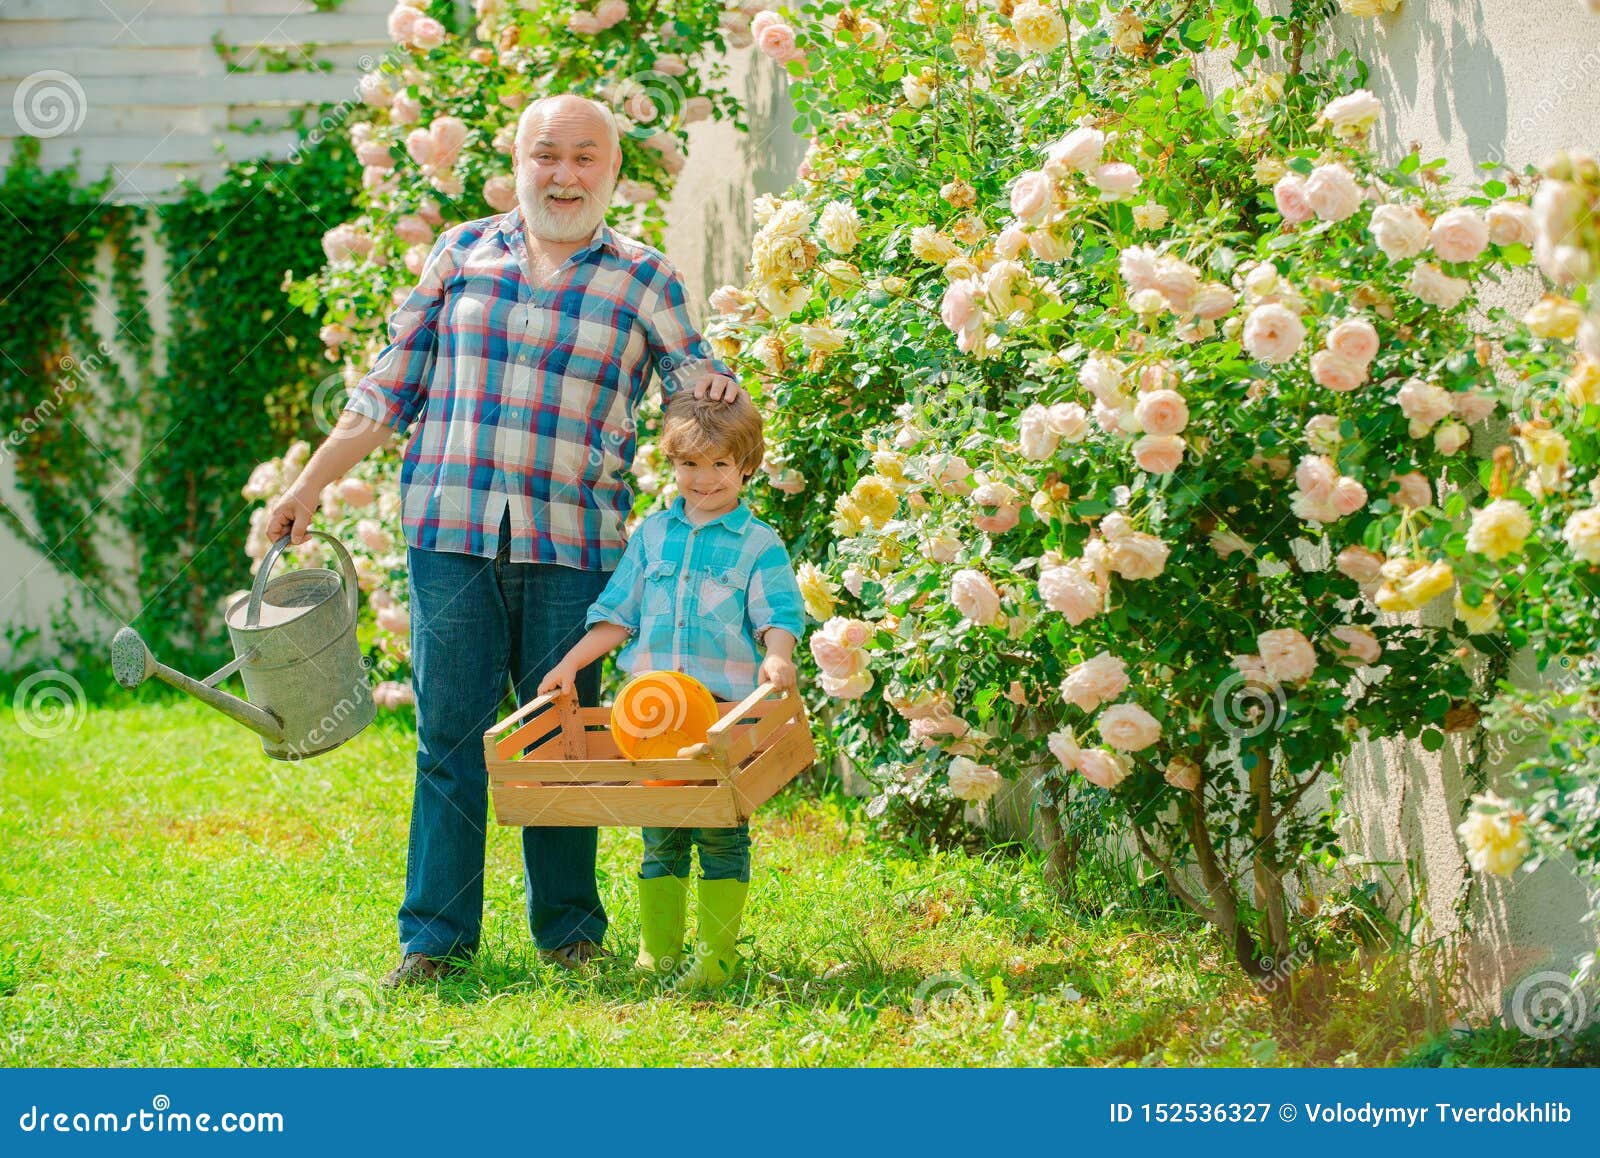 Planting Flowers Grandfather And Grandson In Beautiful Garden A